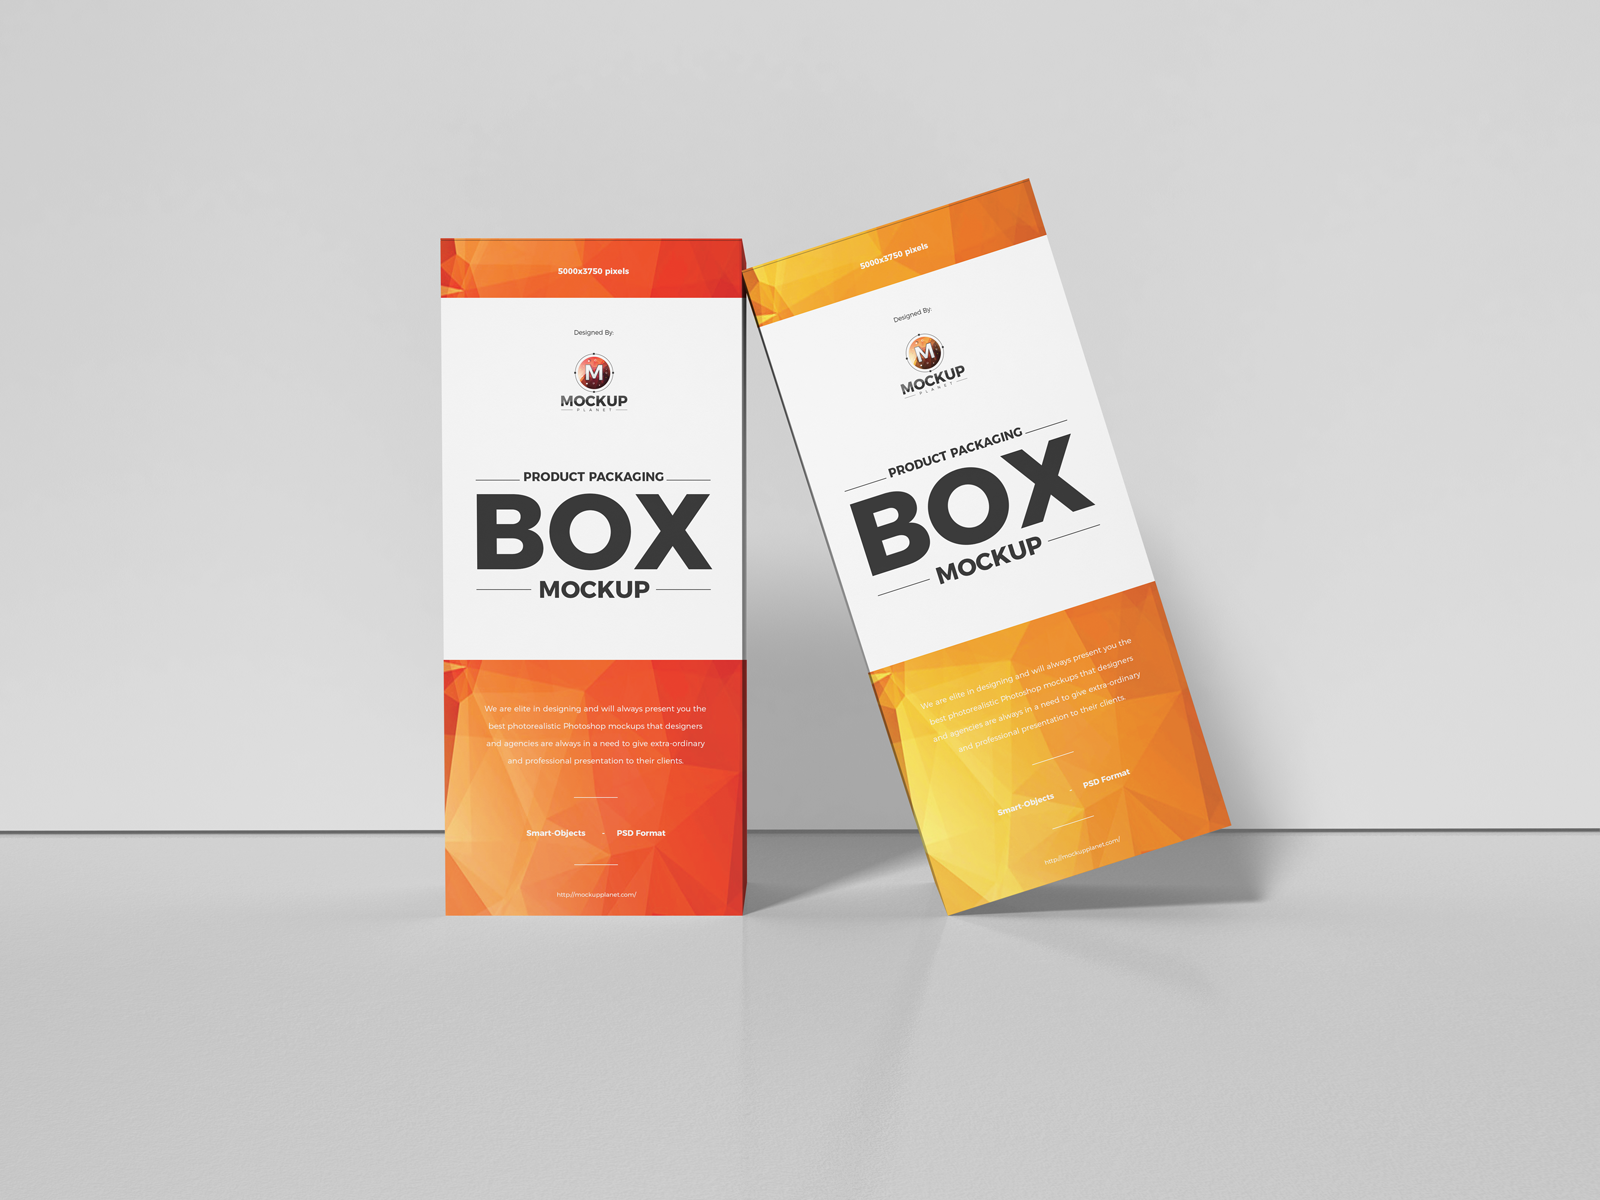 Download Free Product Packaging Box Mockup Design by Mockup Planet ...